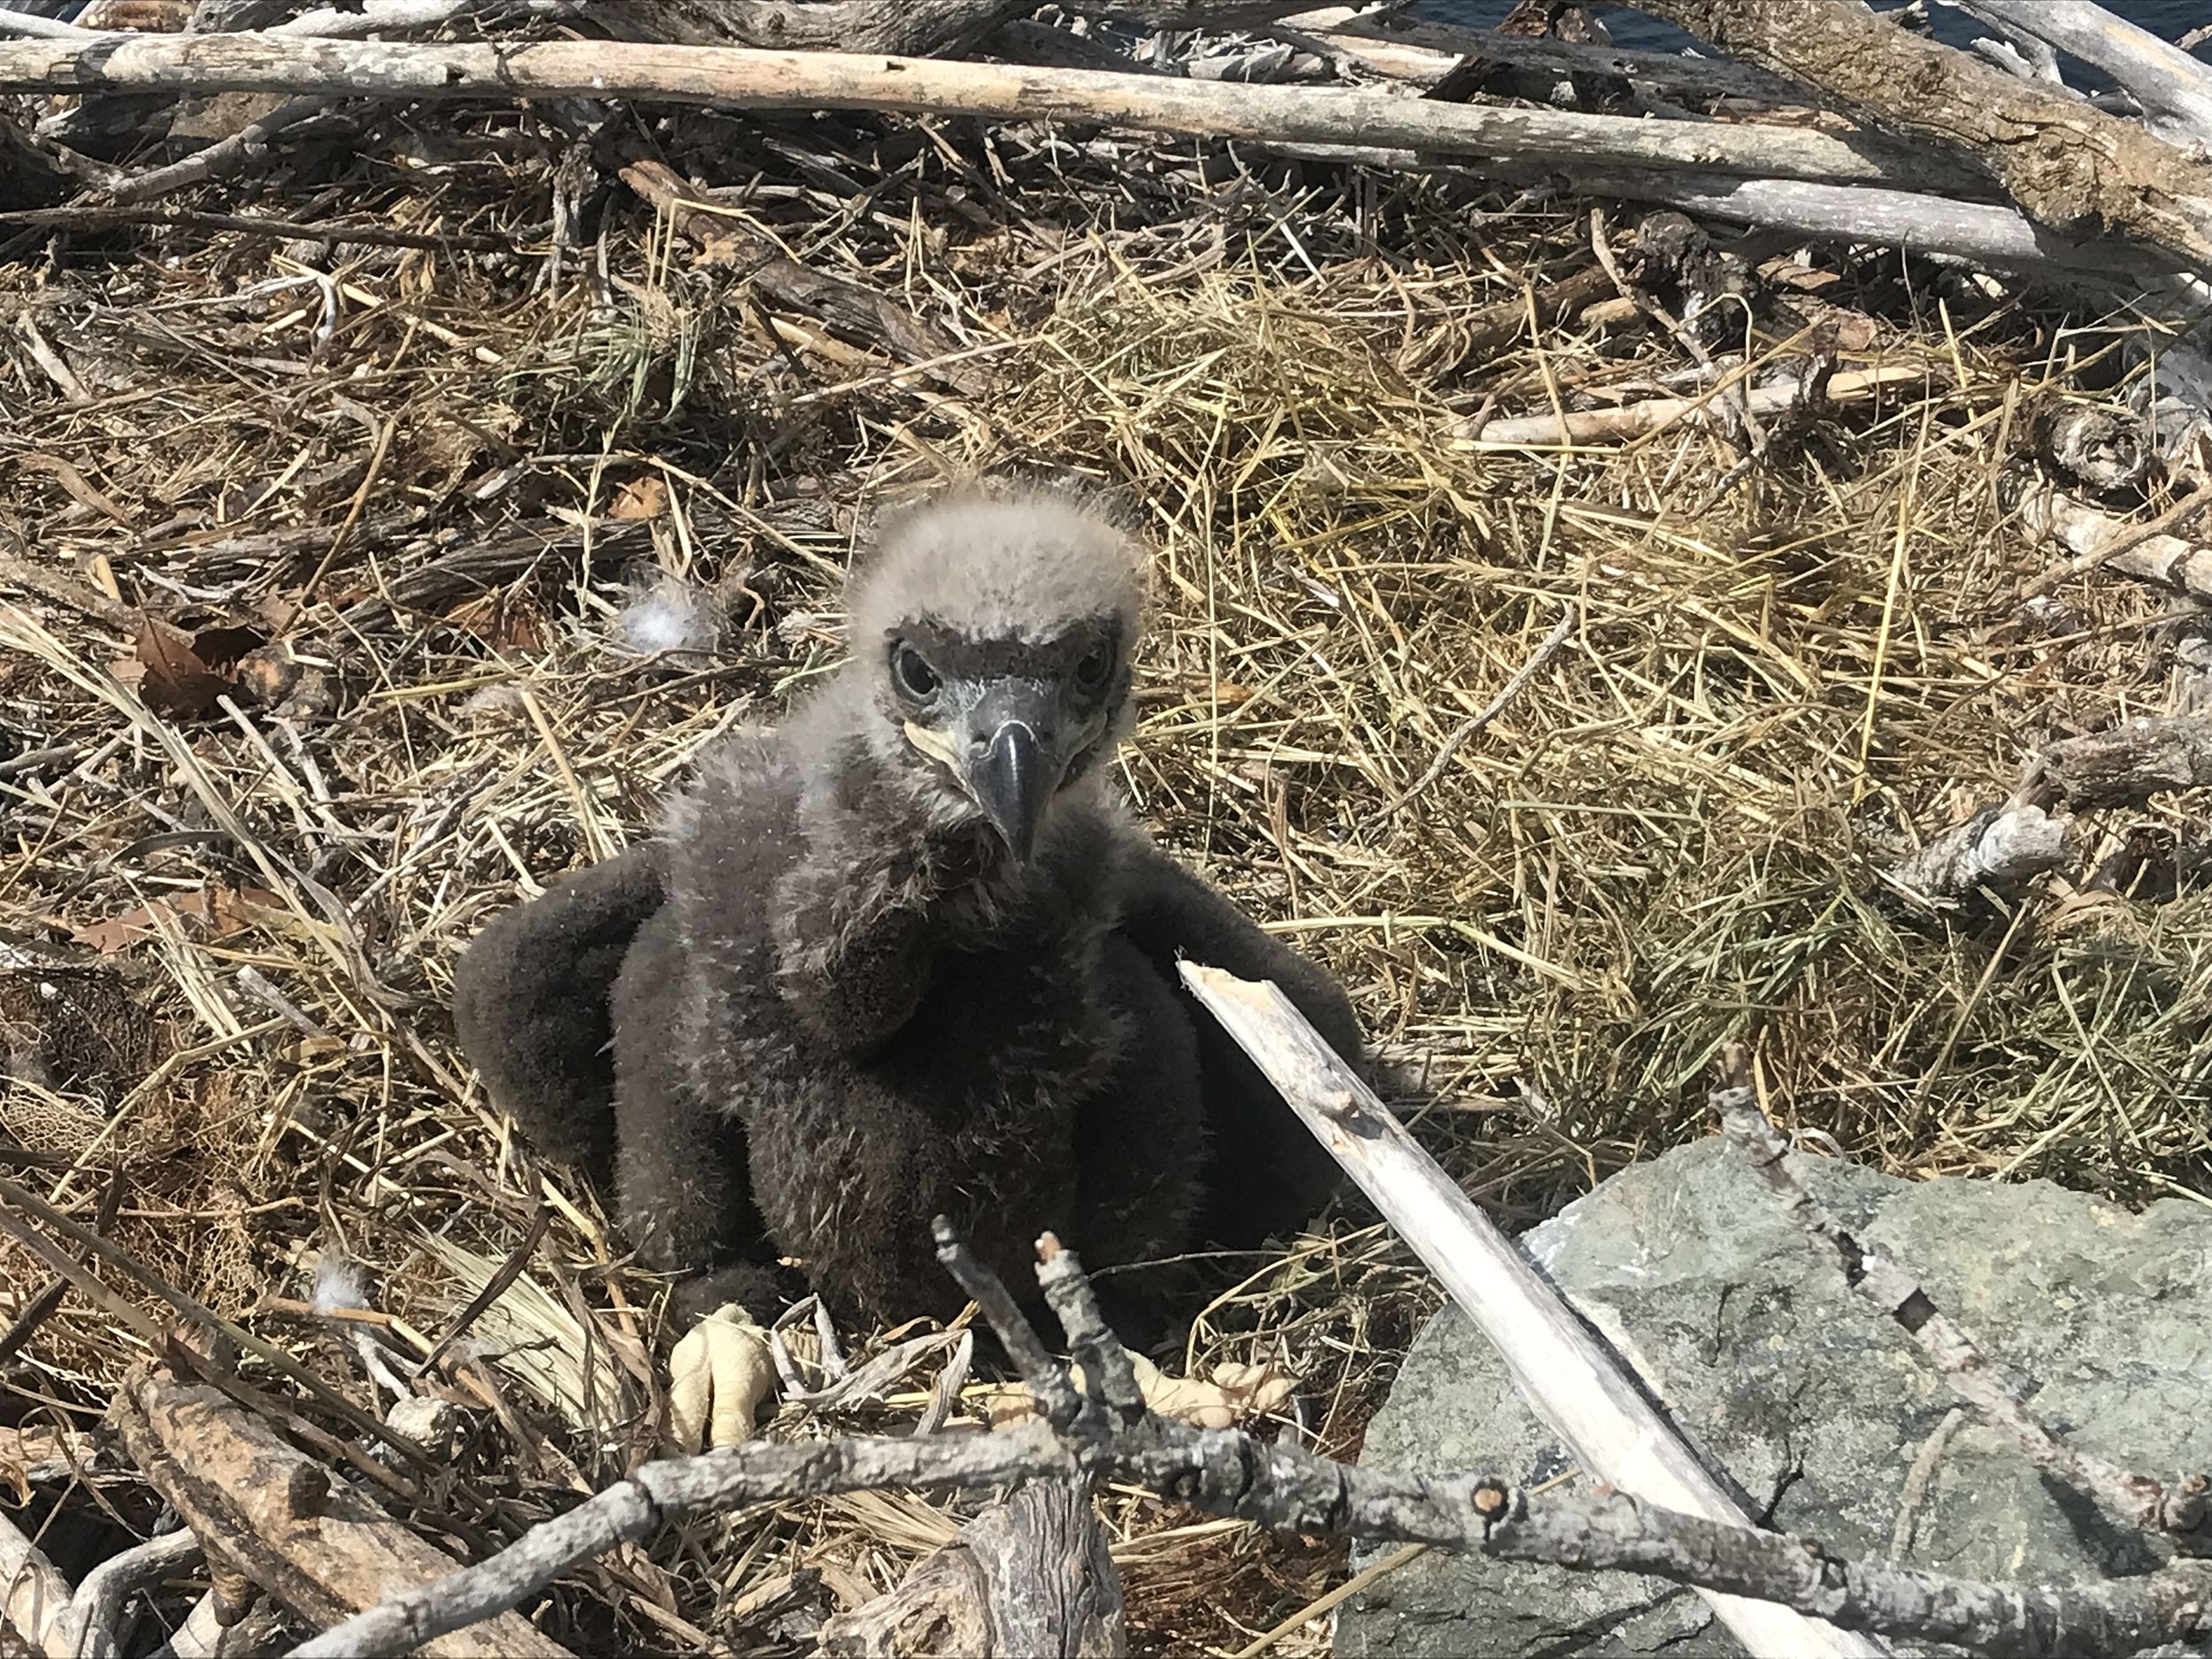 Baby bald eagle rescued after parent accidentally kicks it from nest | CNN